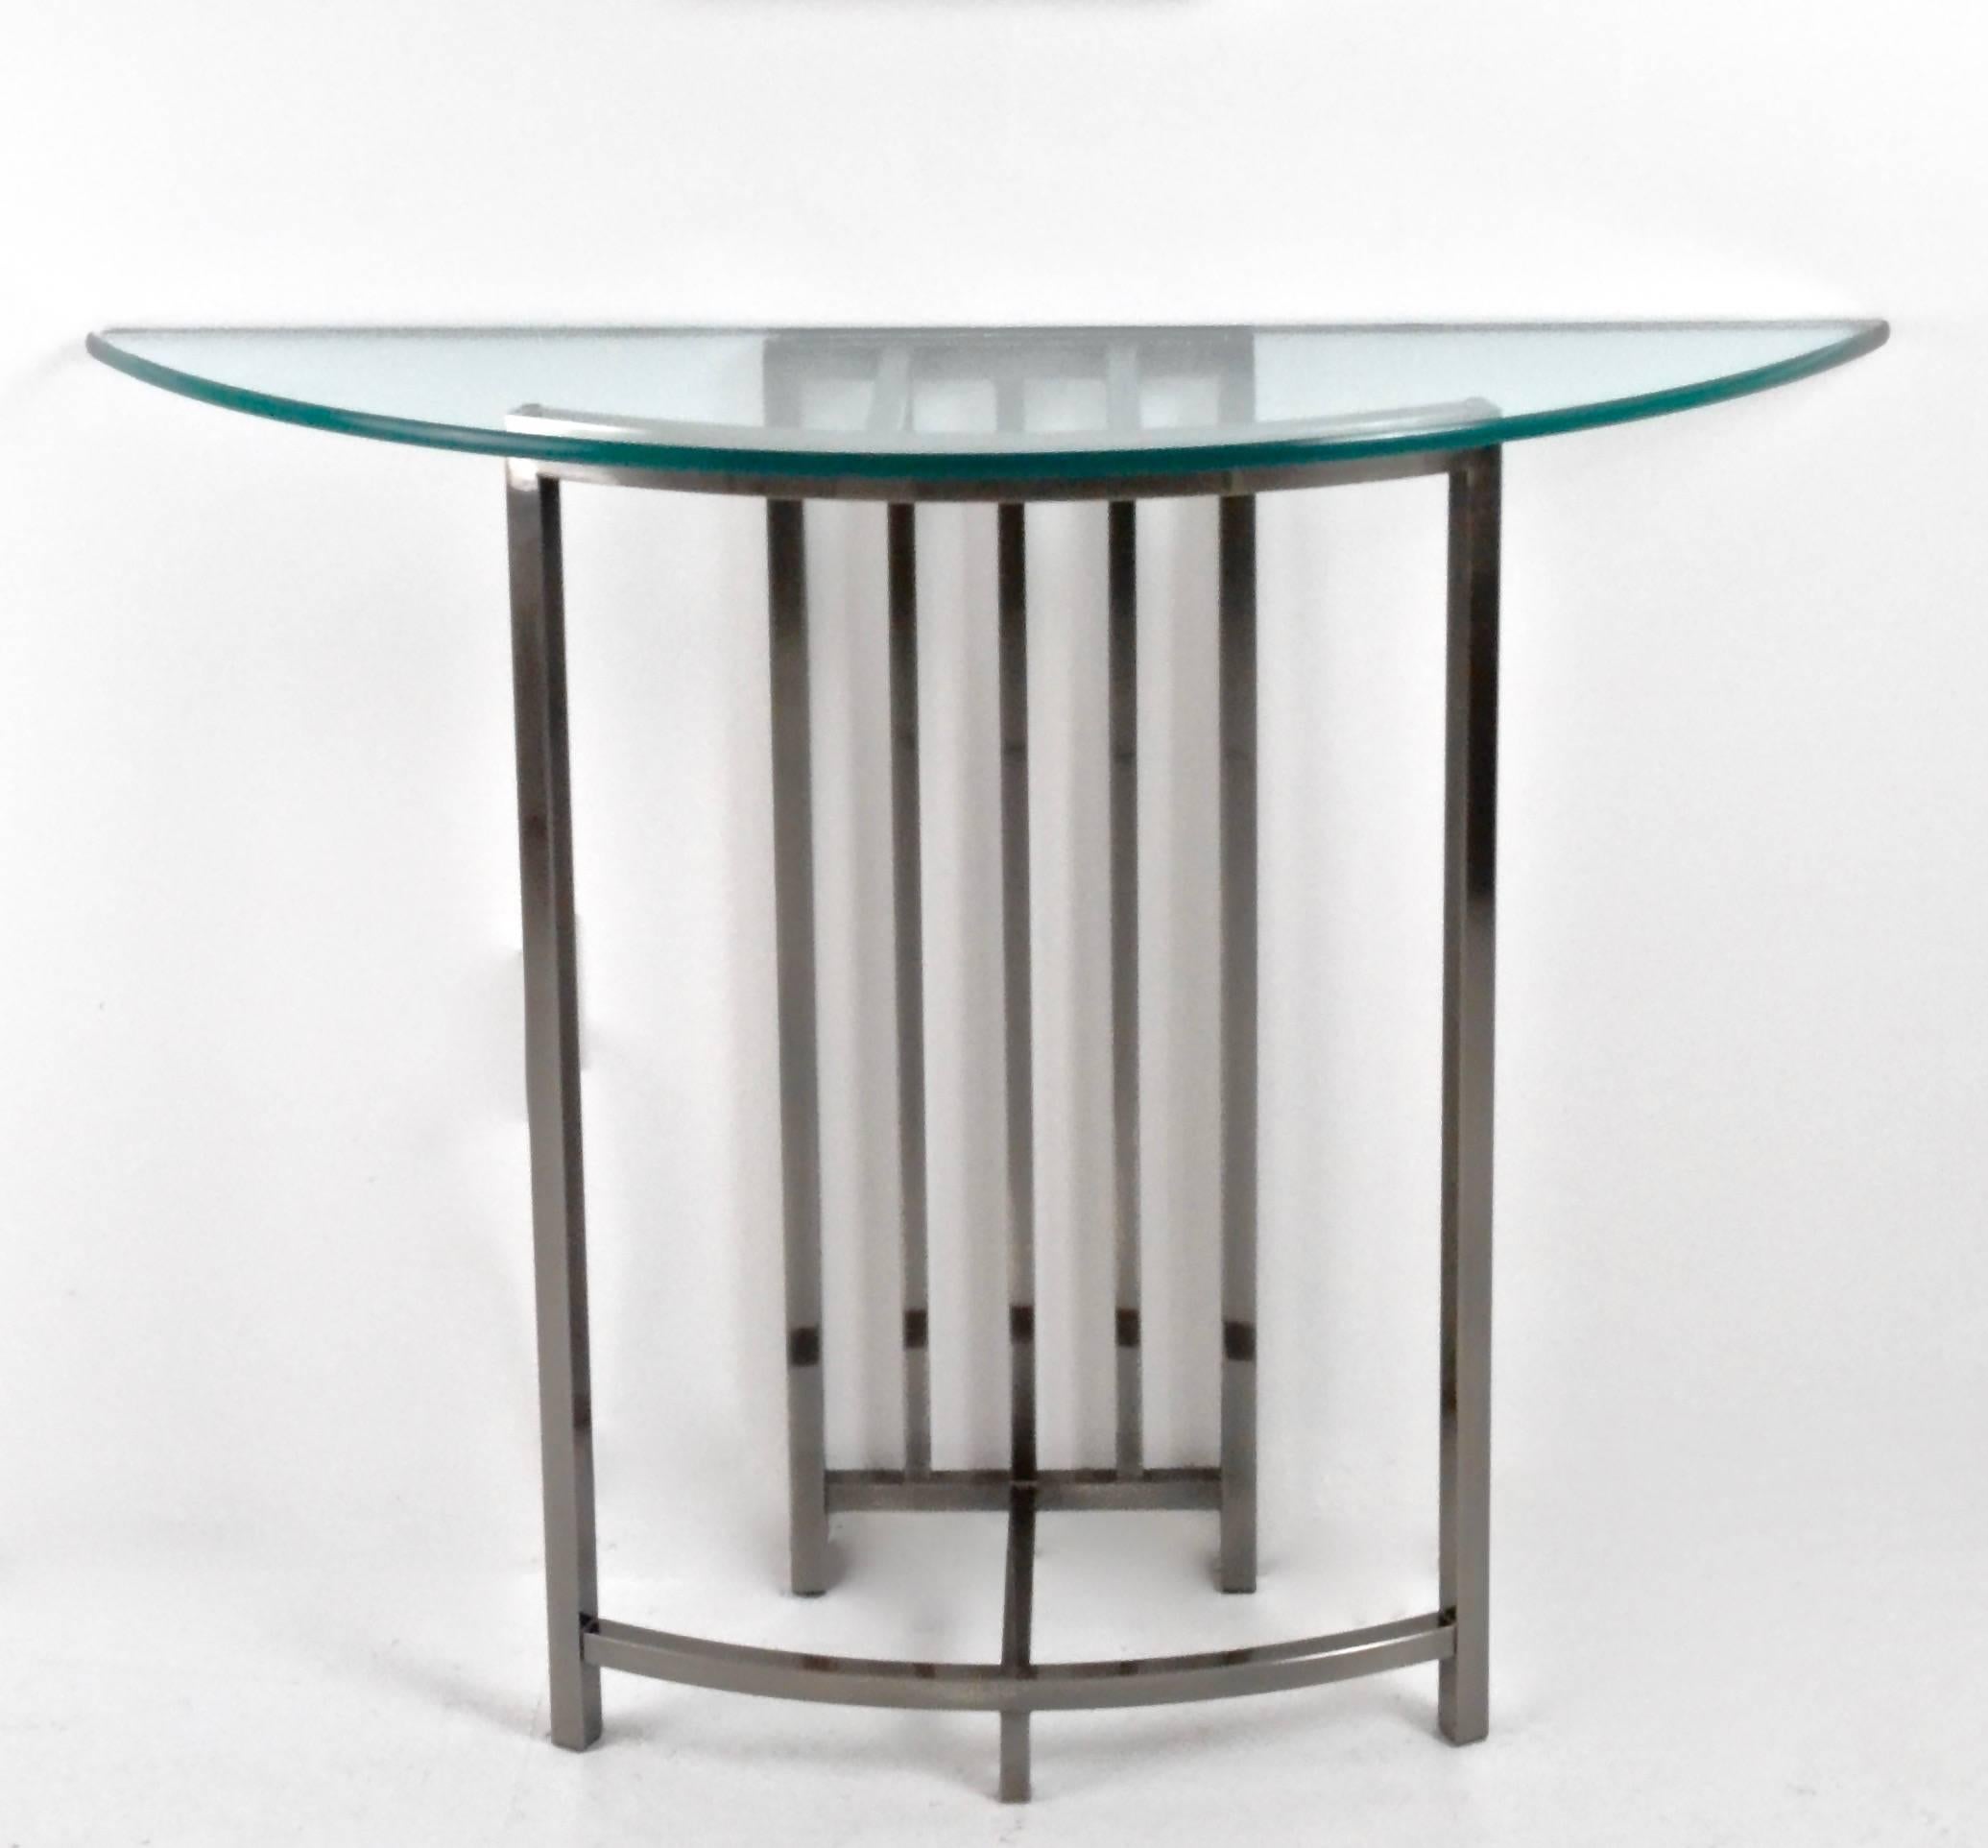 Brushed steel console table with heavy glass top and matching mirror. Mirror features brass ball detail and oriental motif. The console table measures 48